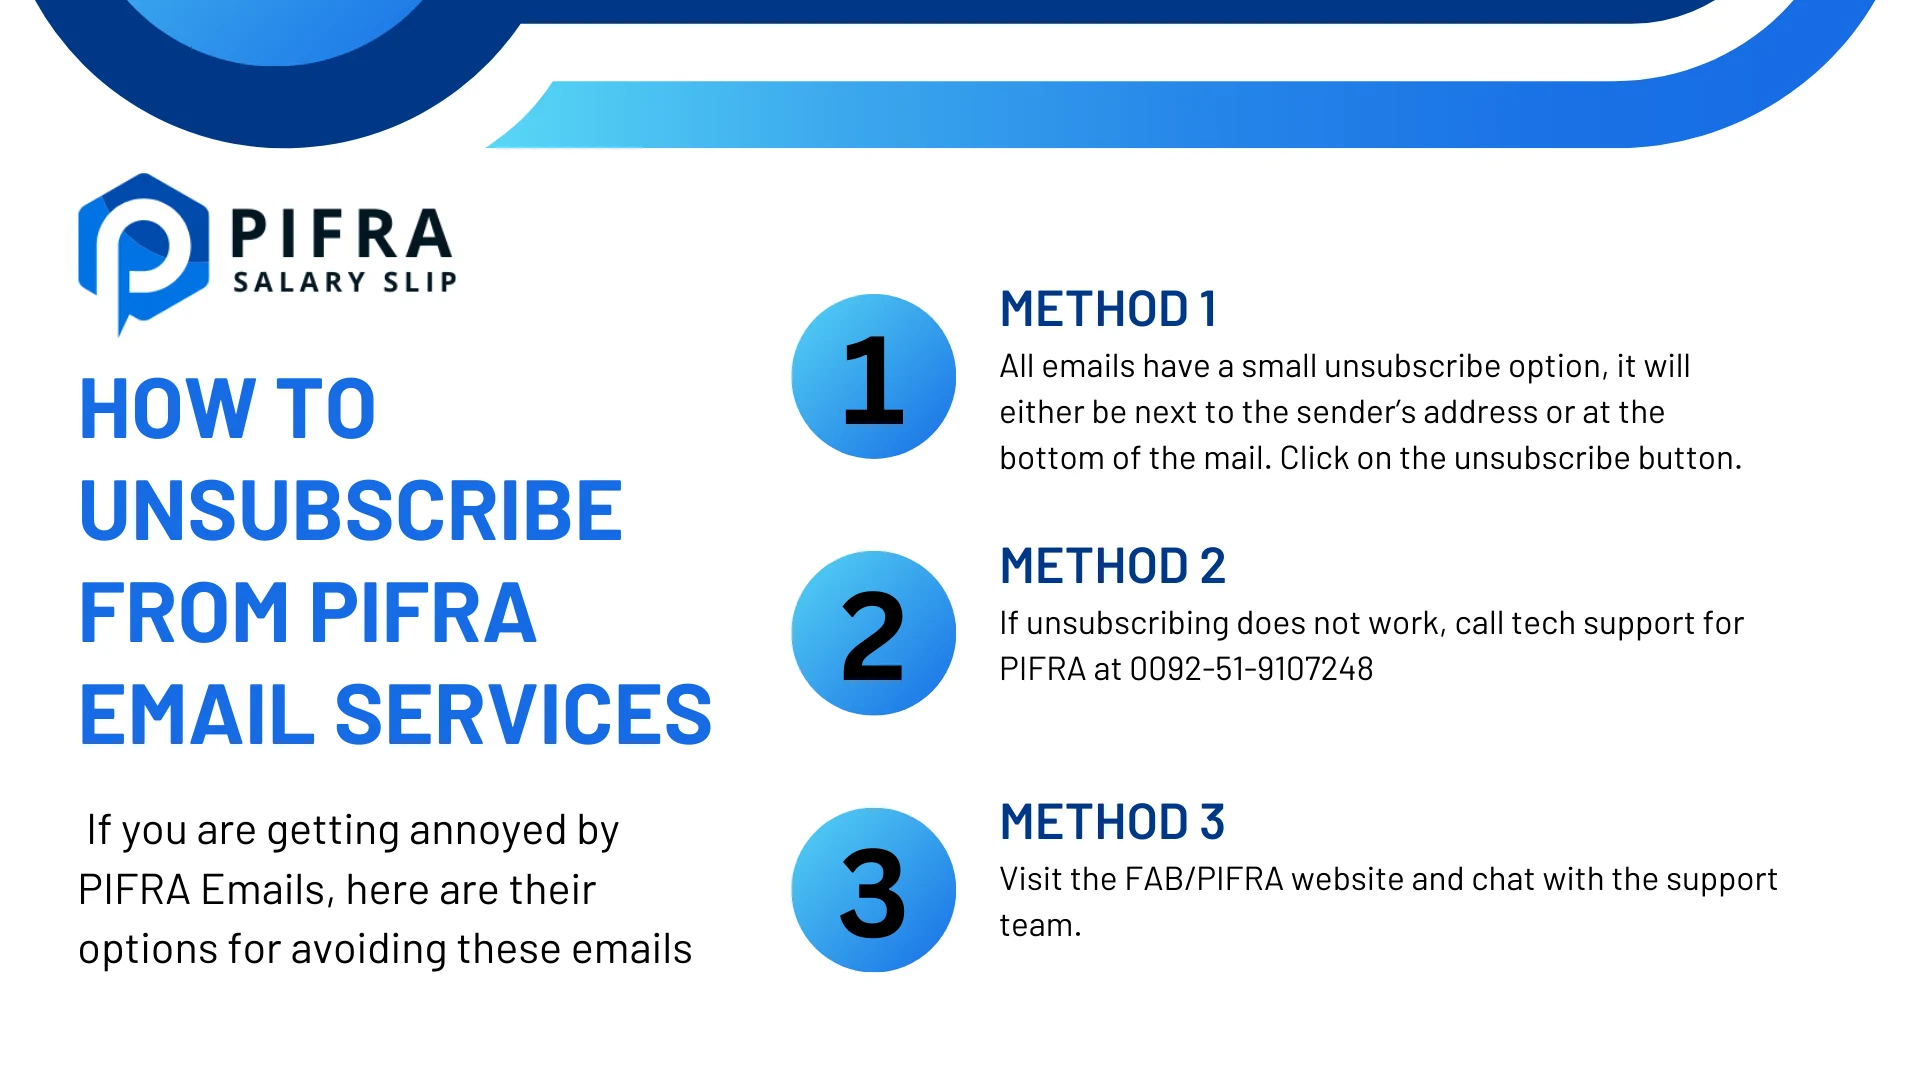 How to unsubscribe from PIFRA email services